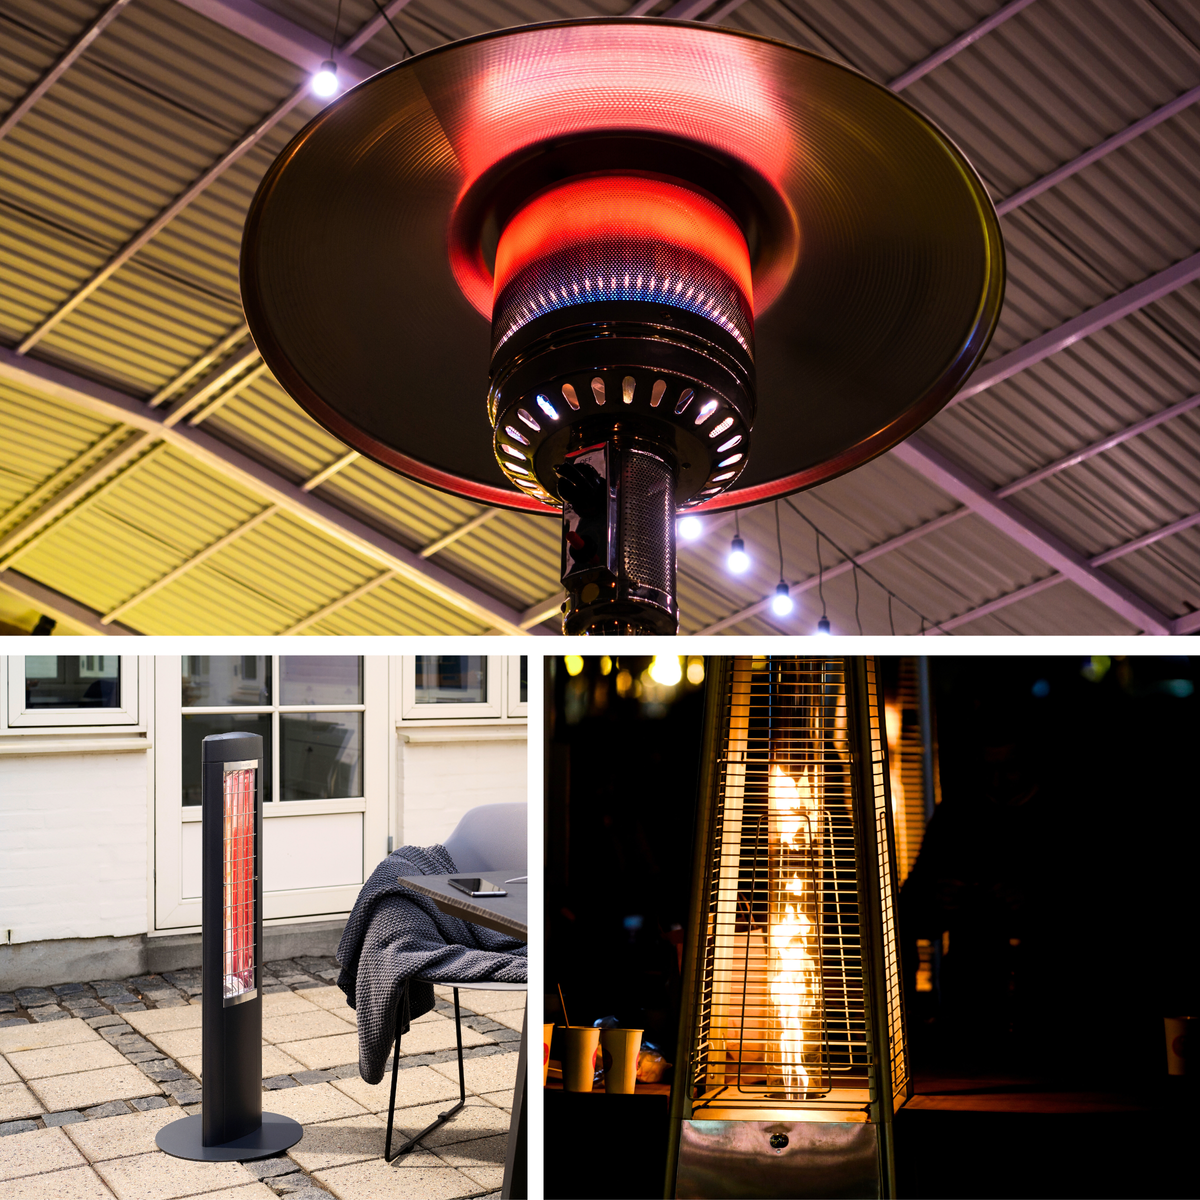 An traditional propane patio heater, and eletric patio heater and an open flame gas patio heater